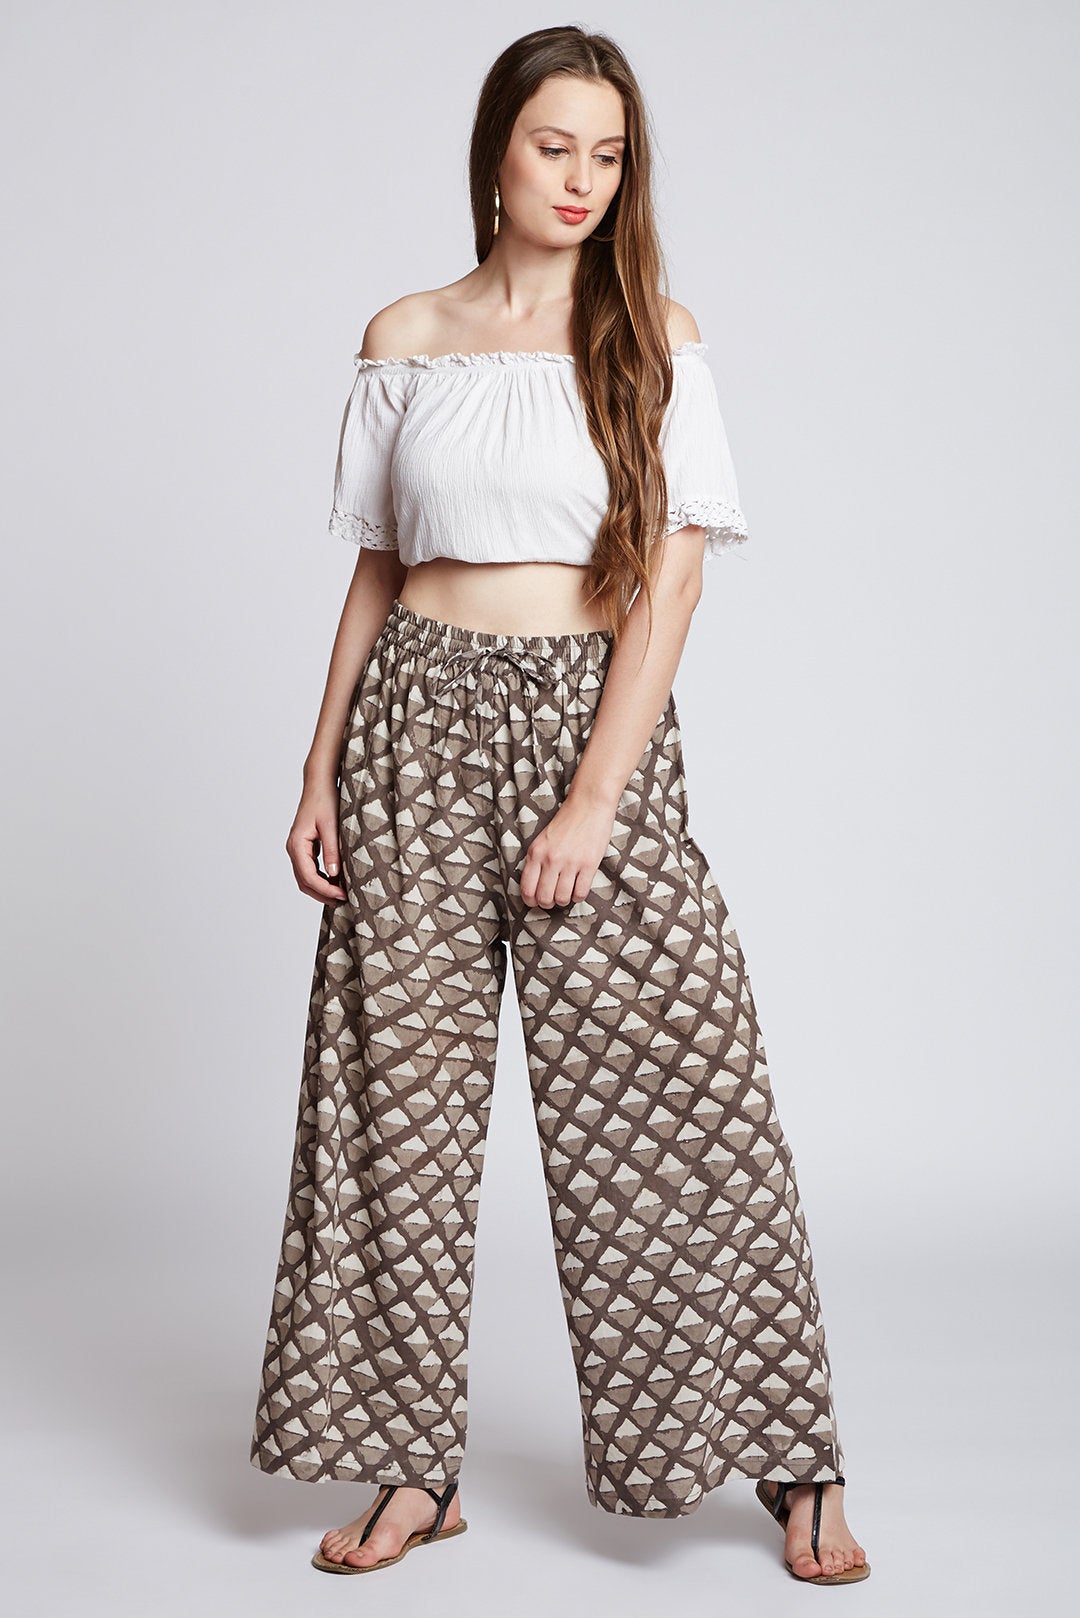 Buy Black White Check Palazzo Pant Cotton Palazzo Pant for Best Price  Reviews Free Shipping